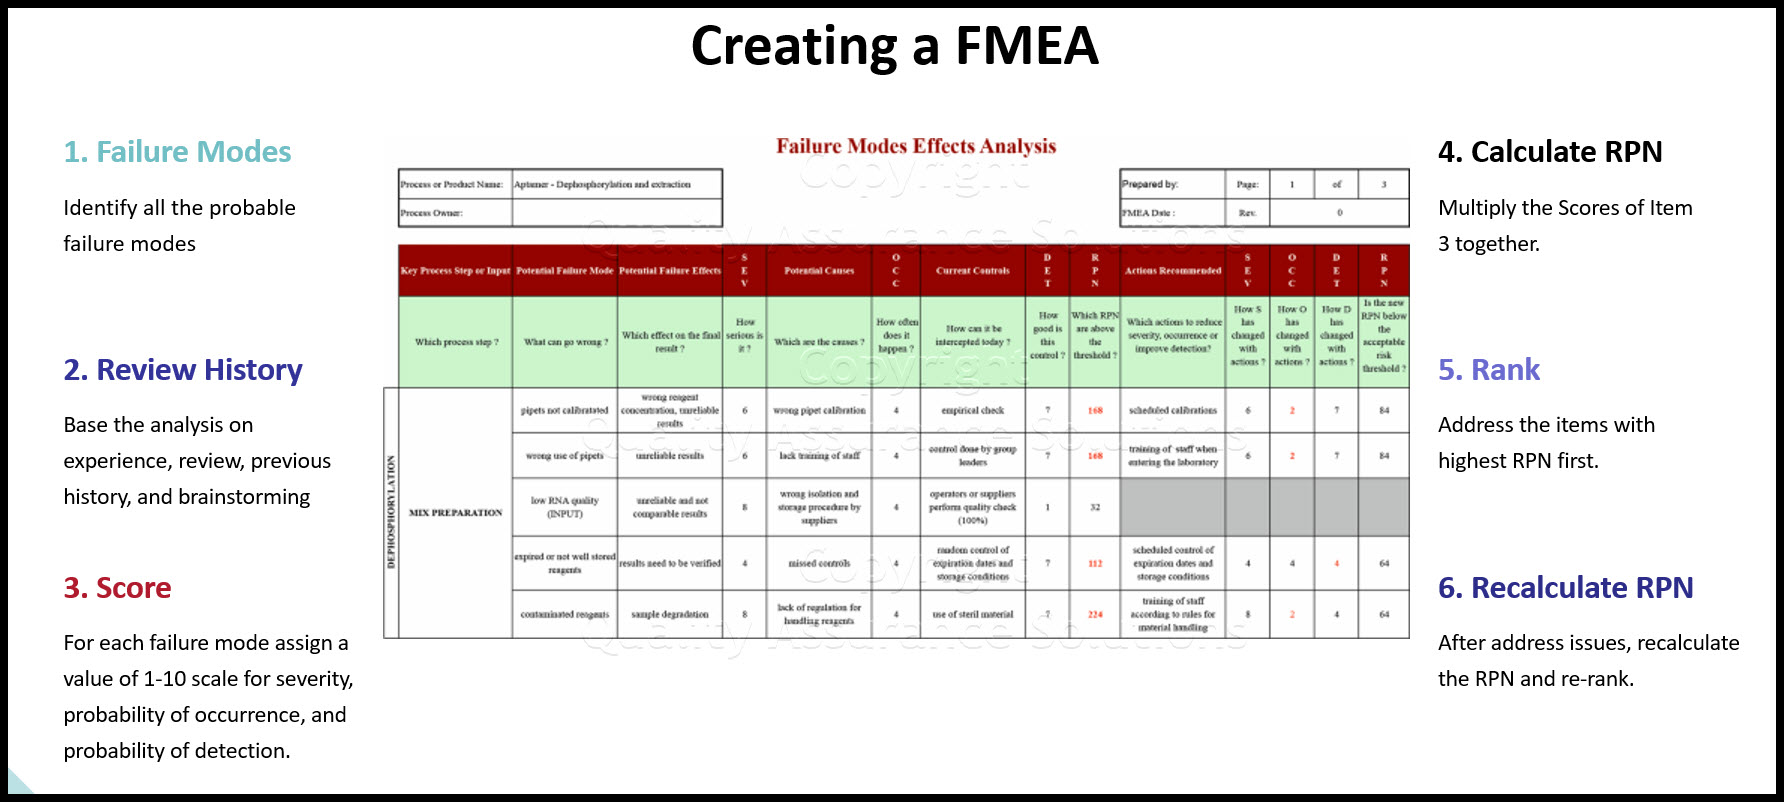 FMEA helps identify Risks within your organizaion. Based on the FMEA data you can create a plan to prevent possible issues. 